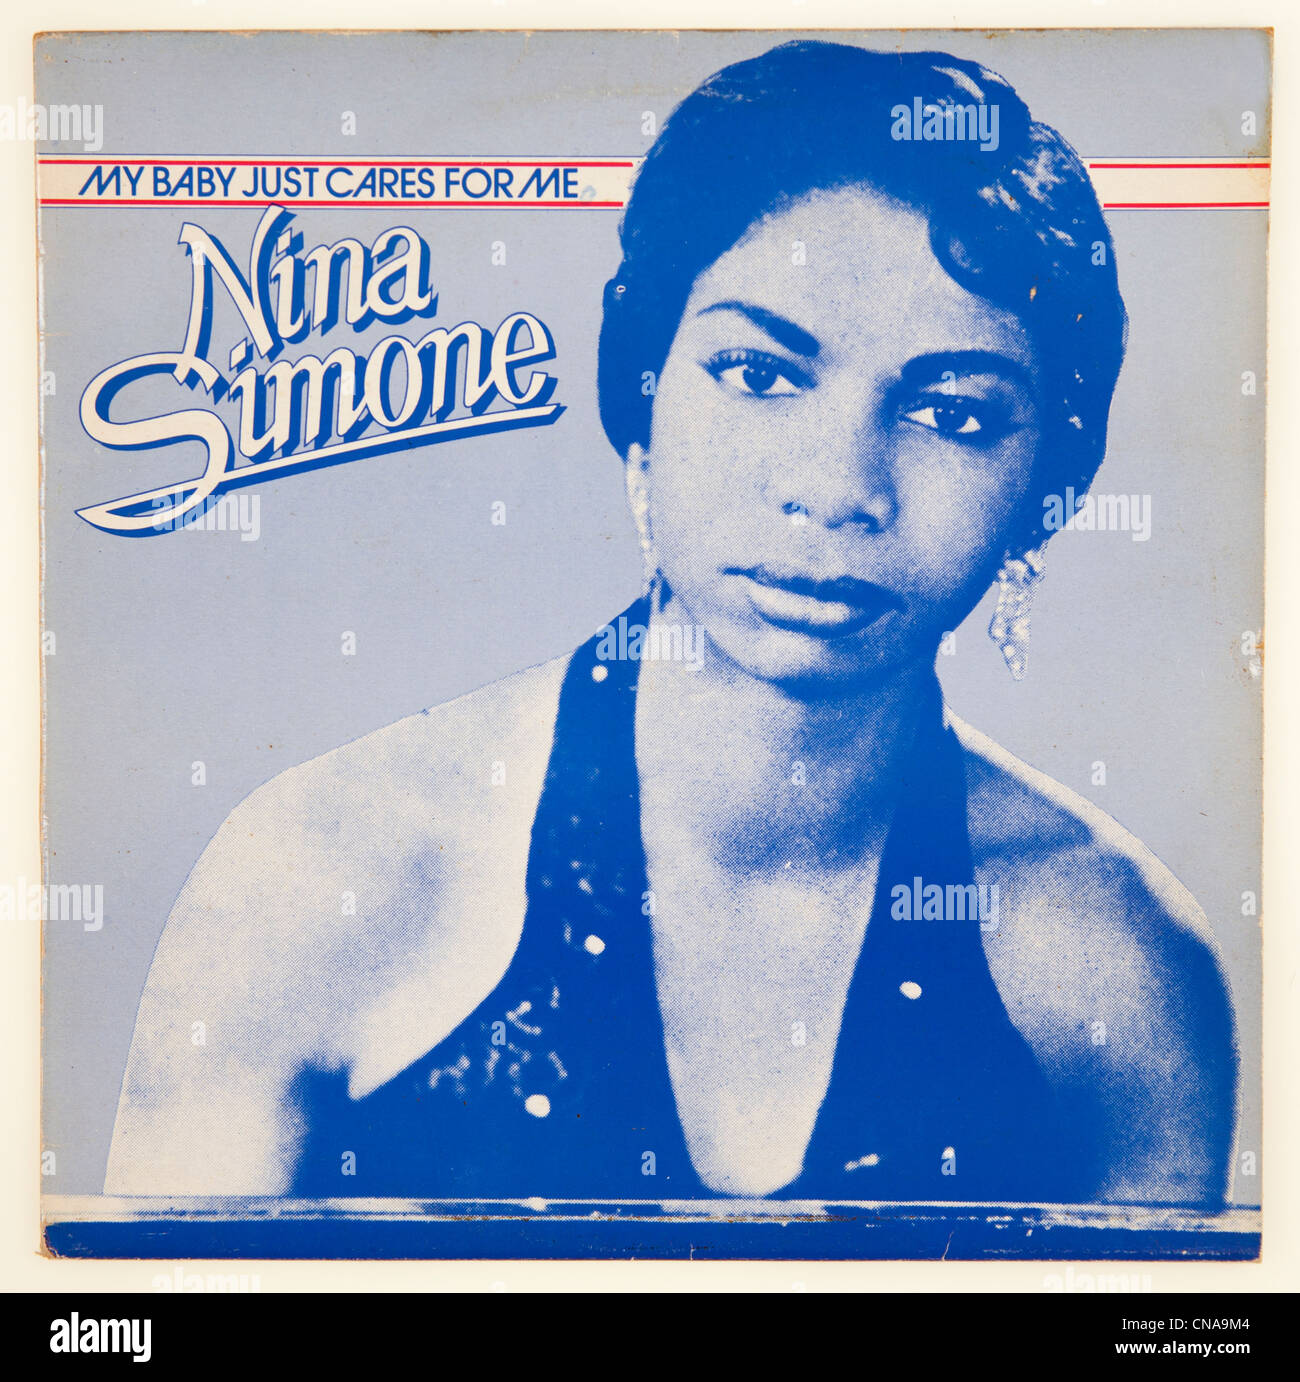 Cover of vinyl compilation album My Baby Just Cares For Me by Nina Simone, released on Charly Records Stock Photo